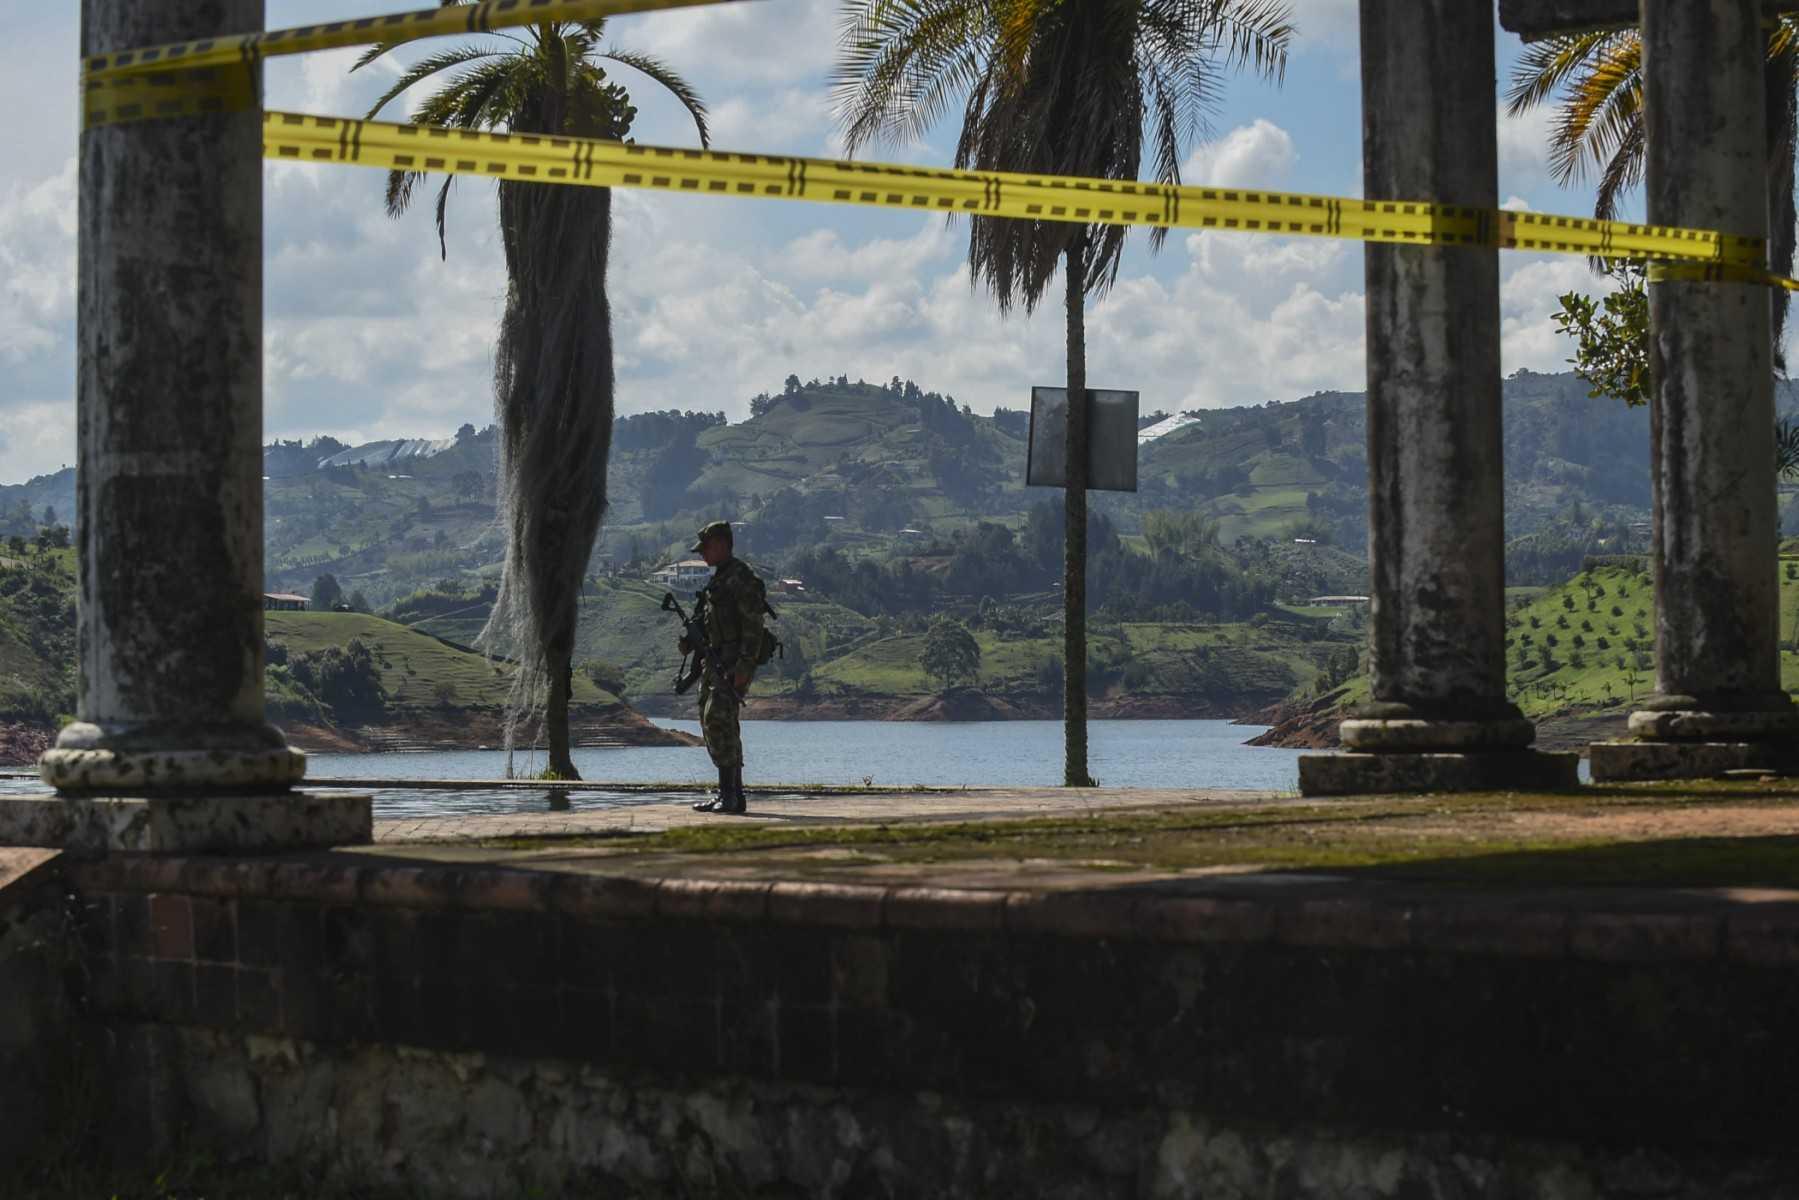 A soldier stands guard at 'La Manuela', a former vacation estate of late drug kingpin Pablo Escobar's family, on El Penol reservoir, in the municipality of the same name near the town of Guatape, east of Medellin, Colombia, taken on April 11, 2019. Photo: AFP